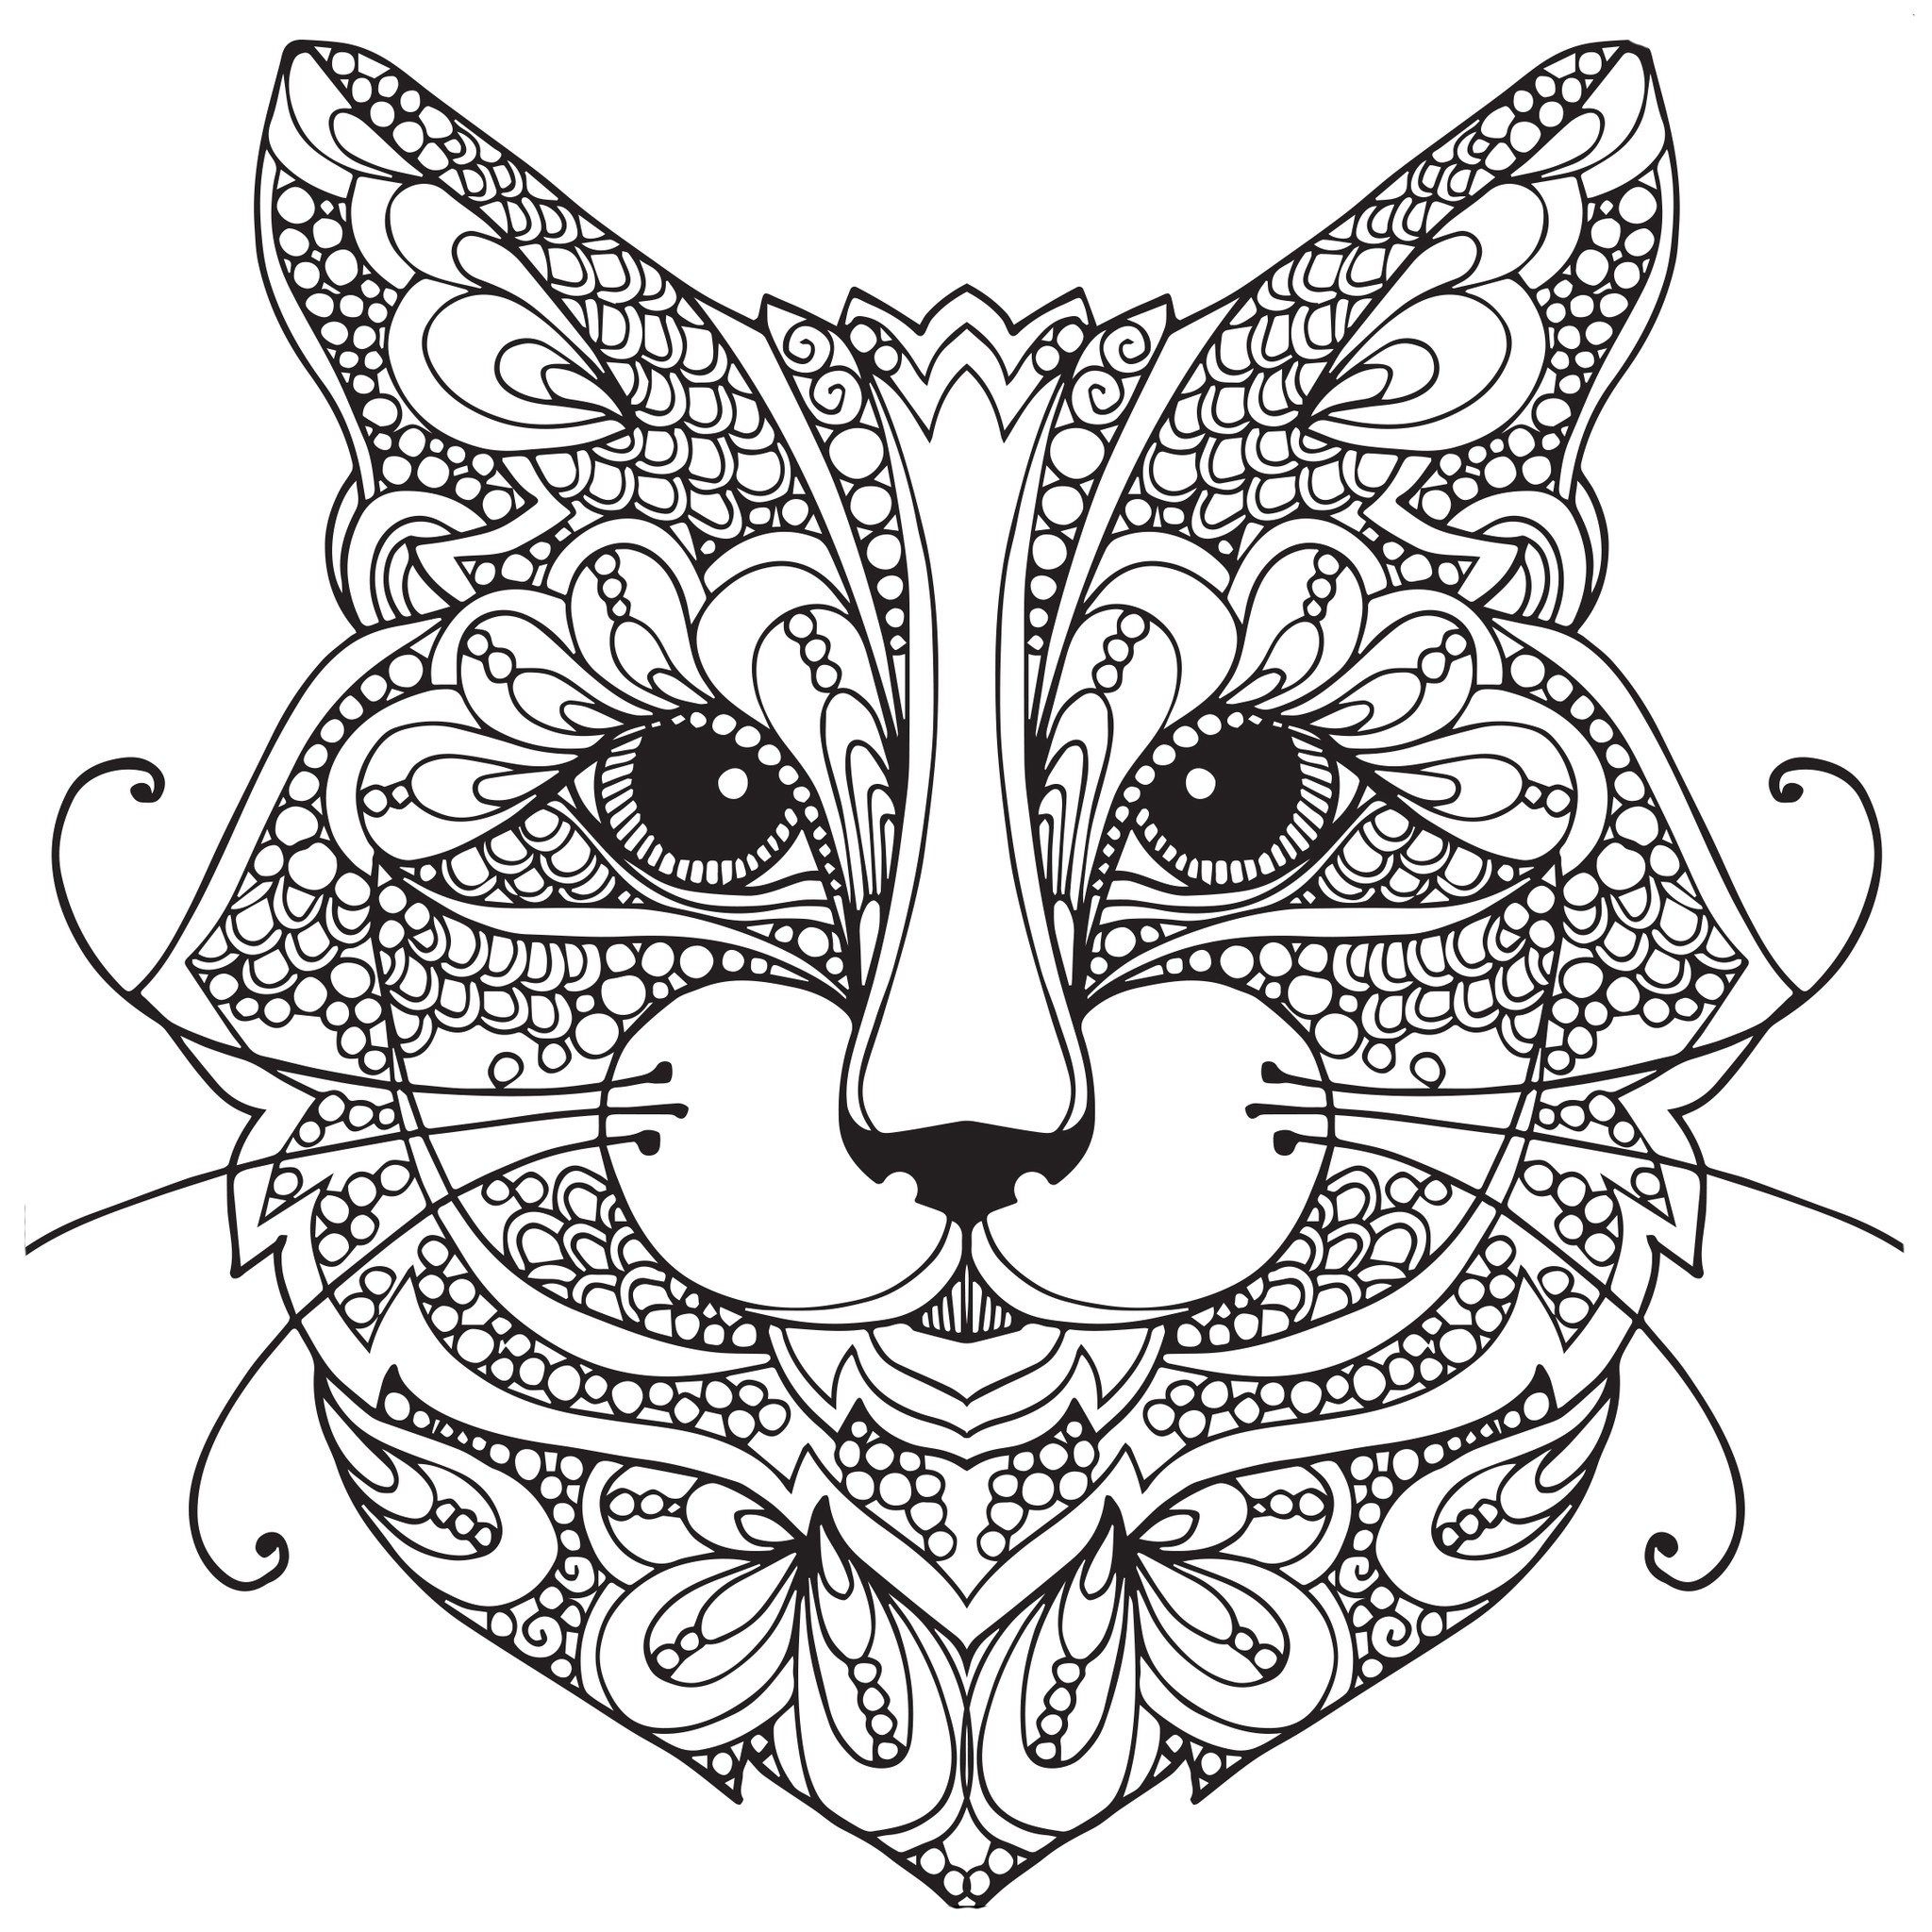 Kitten Coloring Pages For Adults at GetColorings.com | Free printable